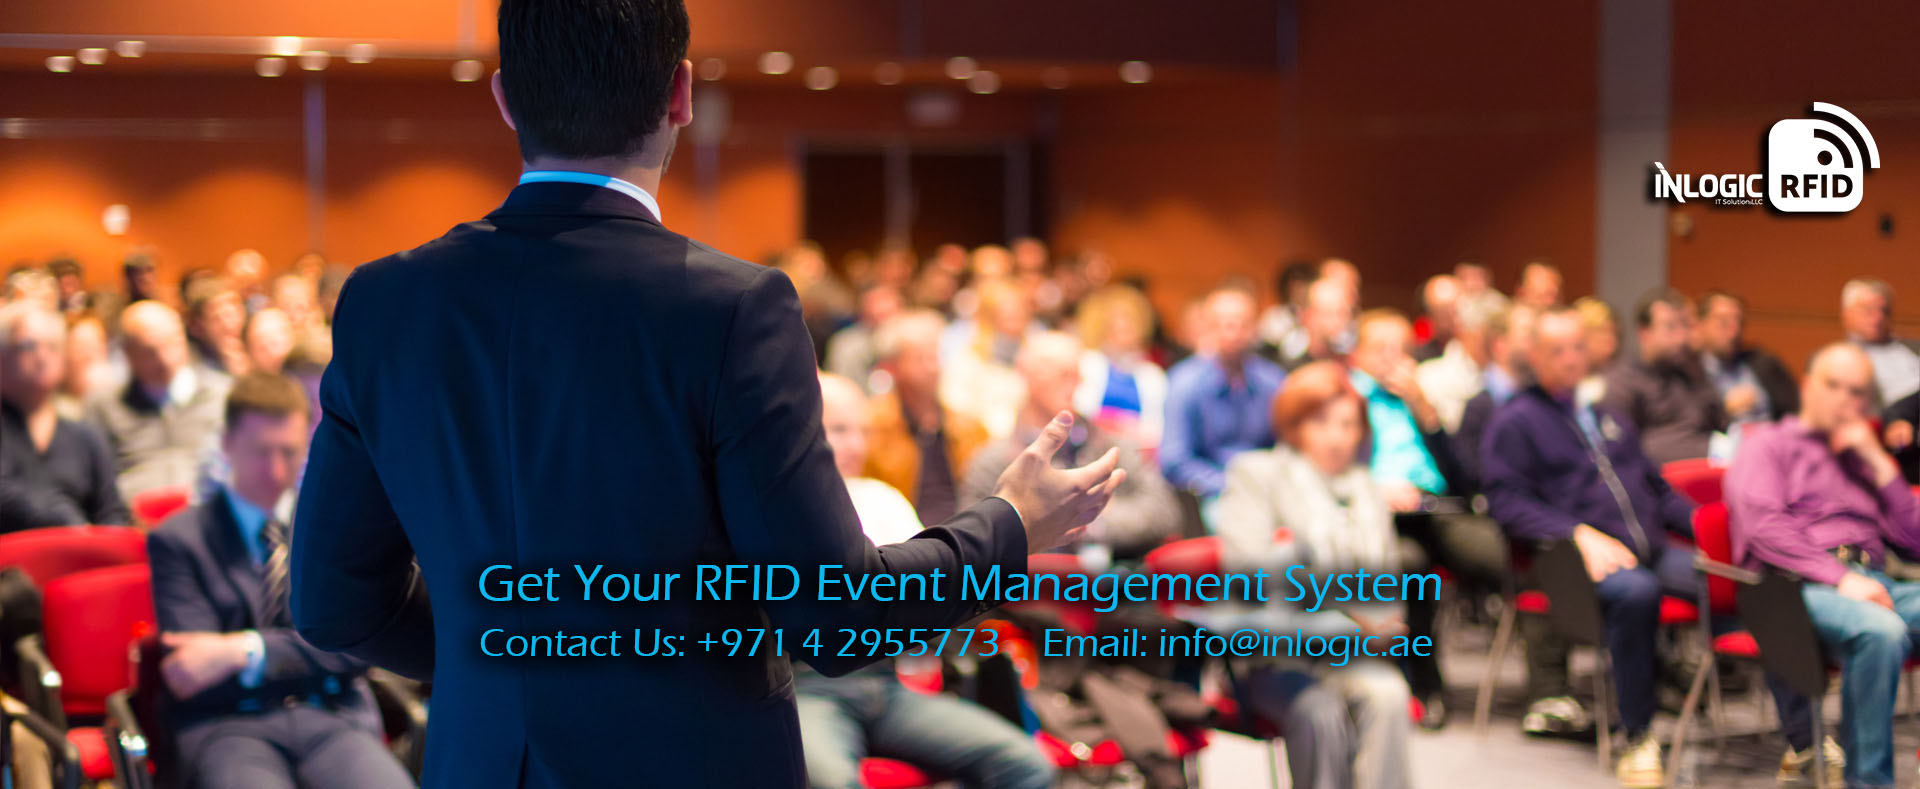 Get Your RFID Event Management System